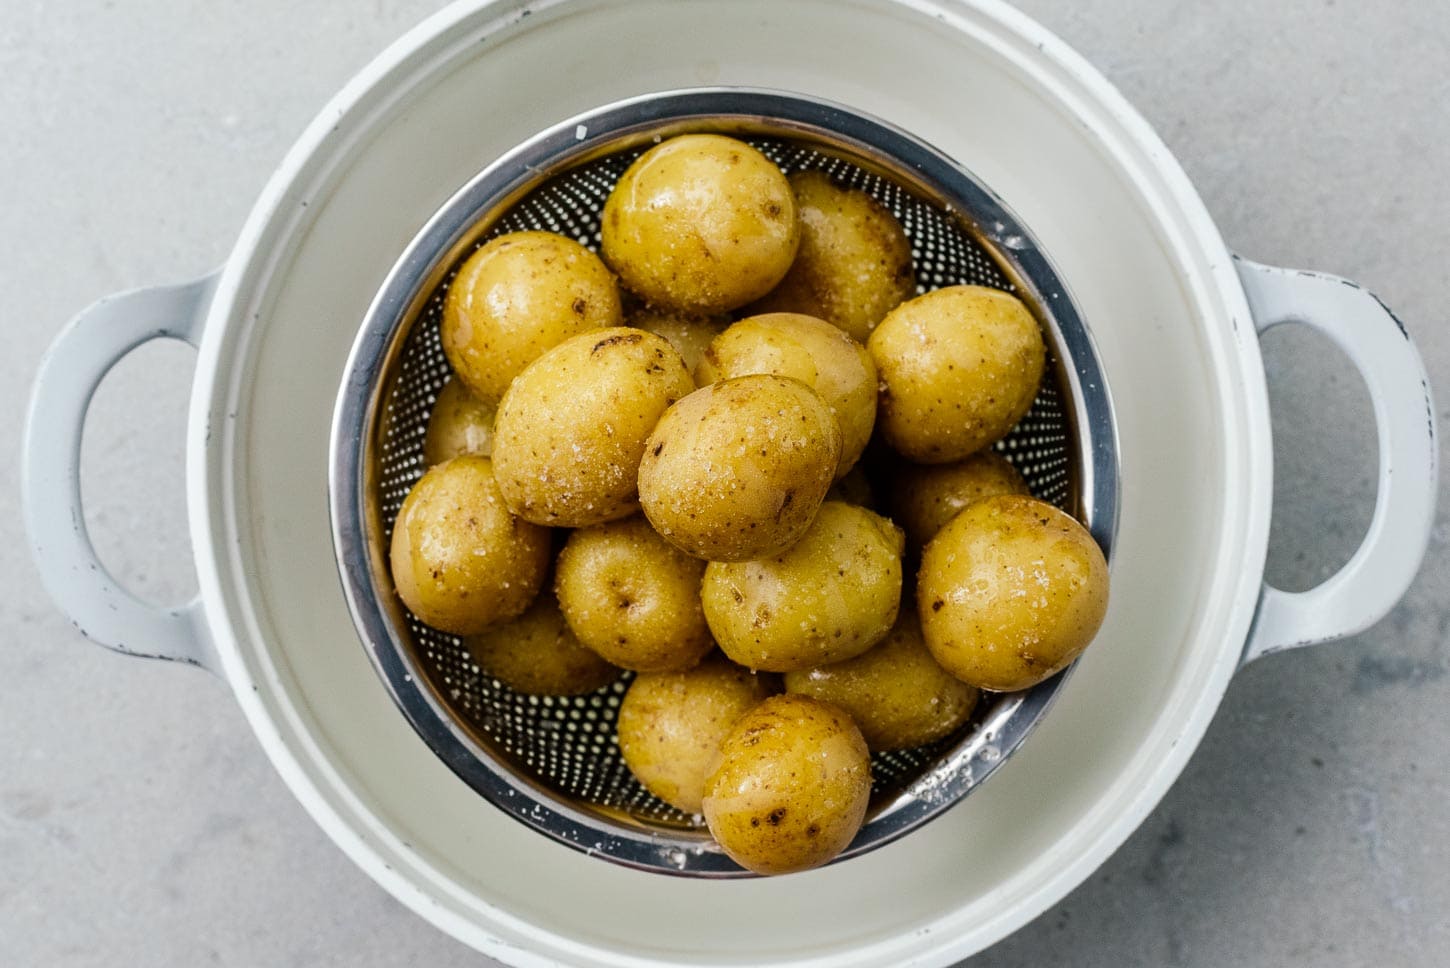 boiled and salted potatoes | sharefavoritefood.com